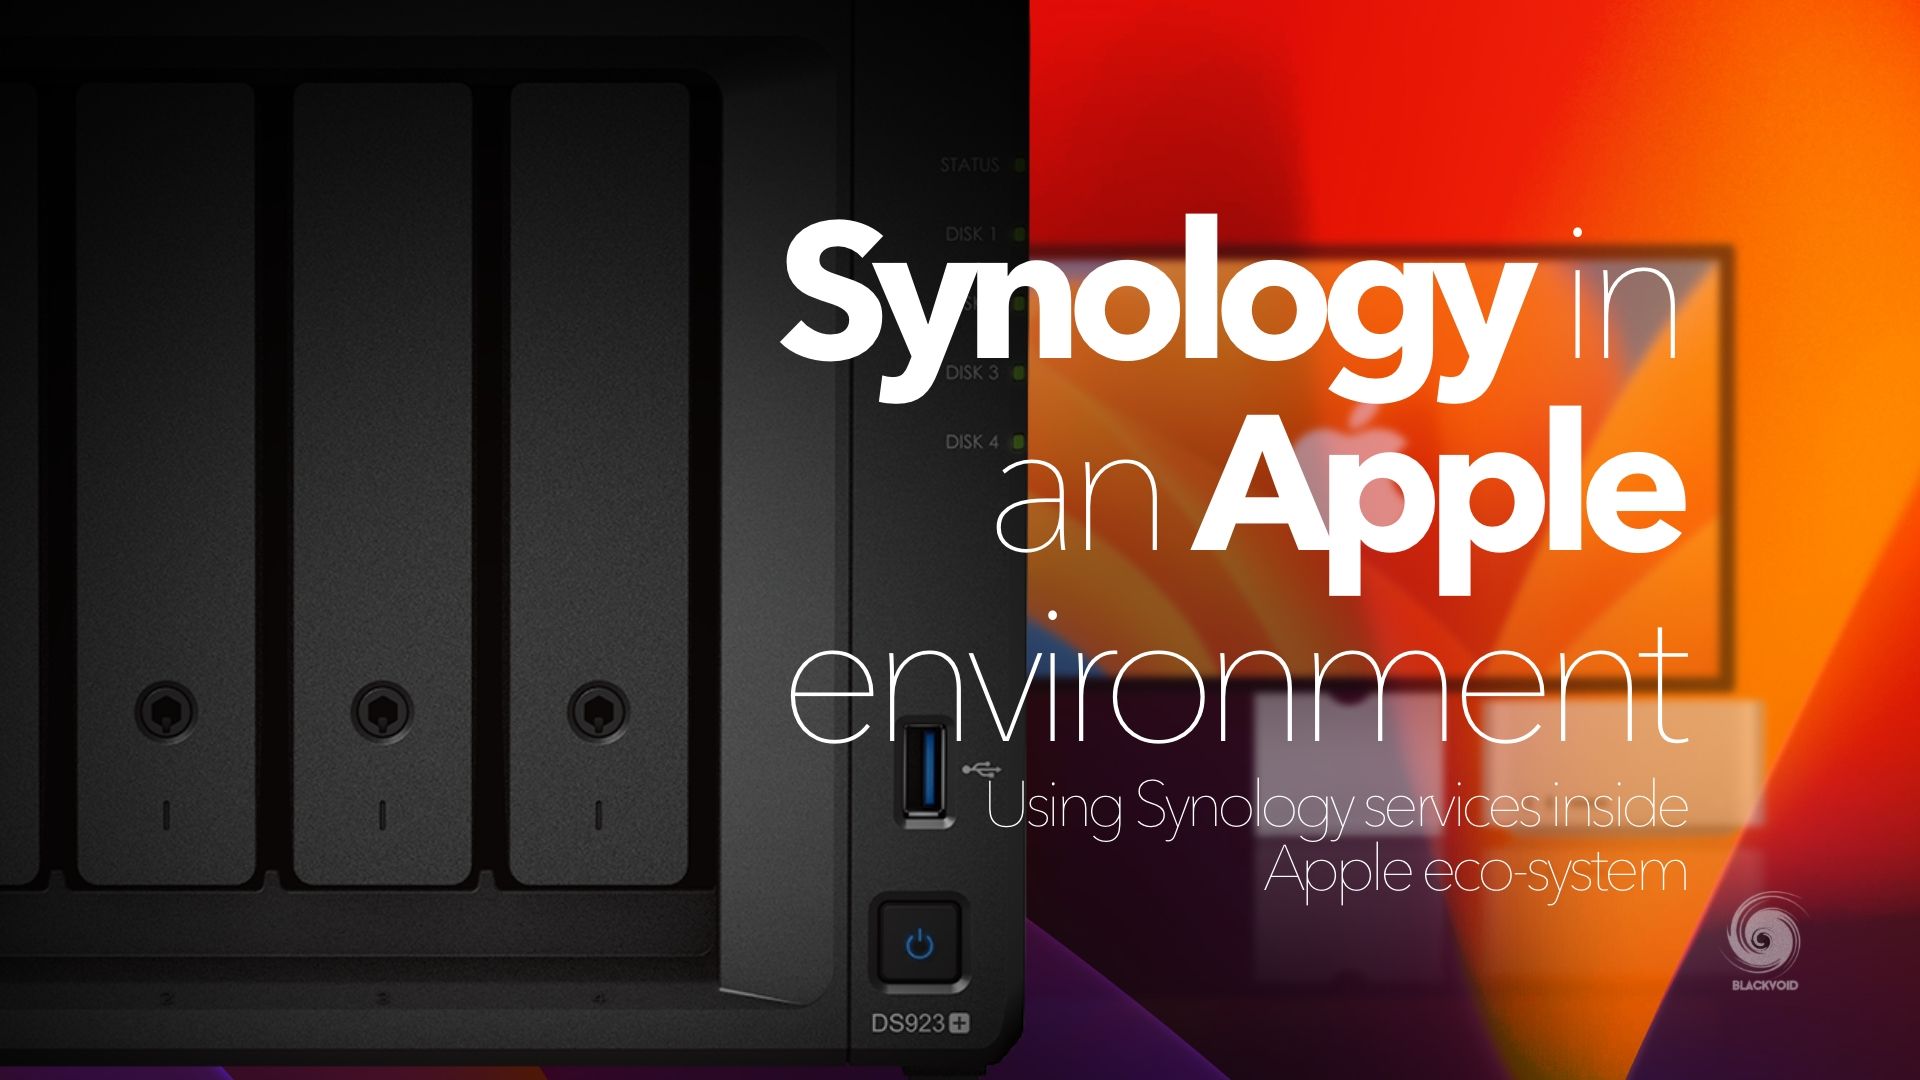 Synology in an Apple environment